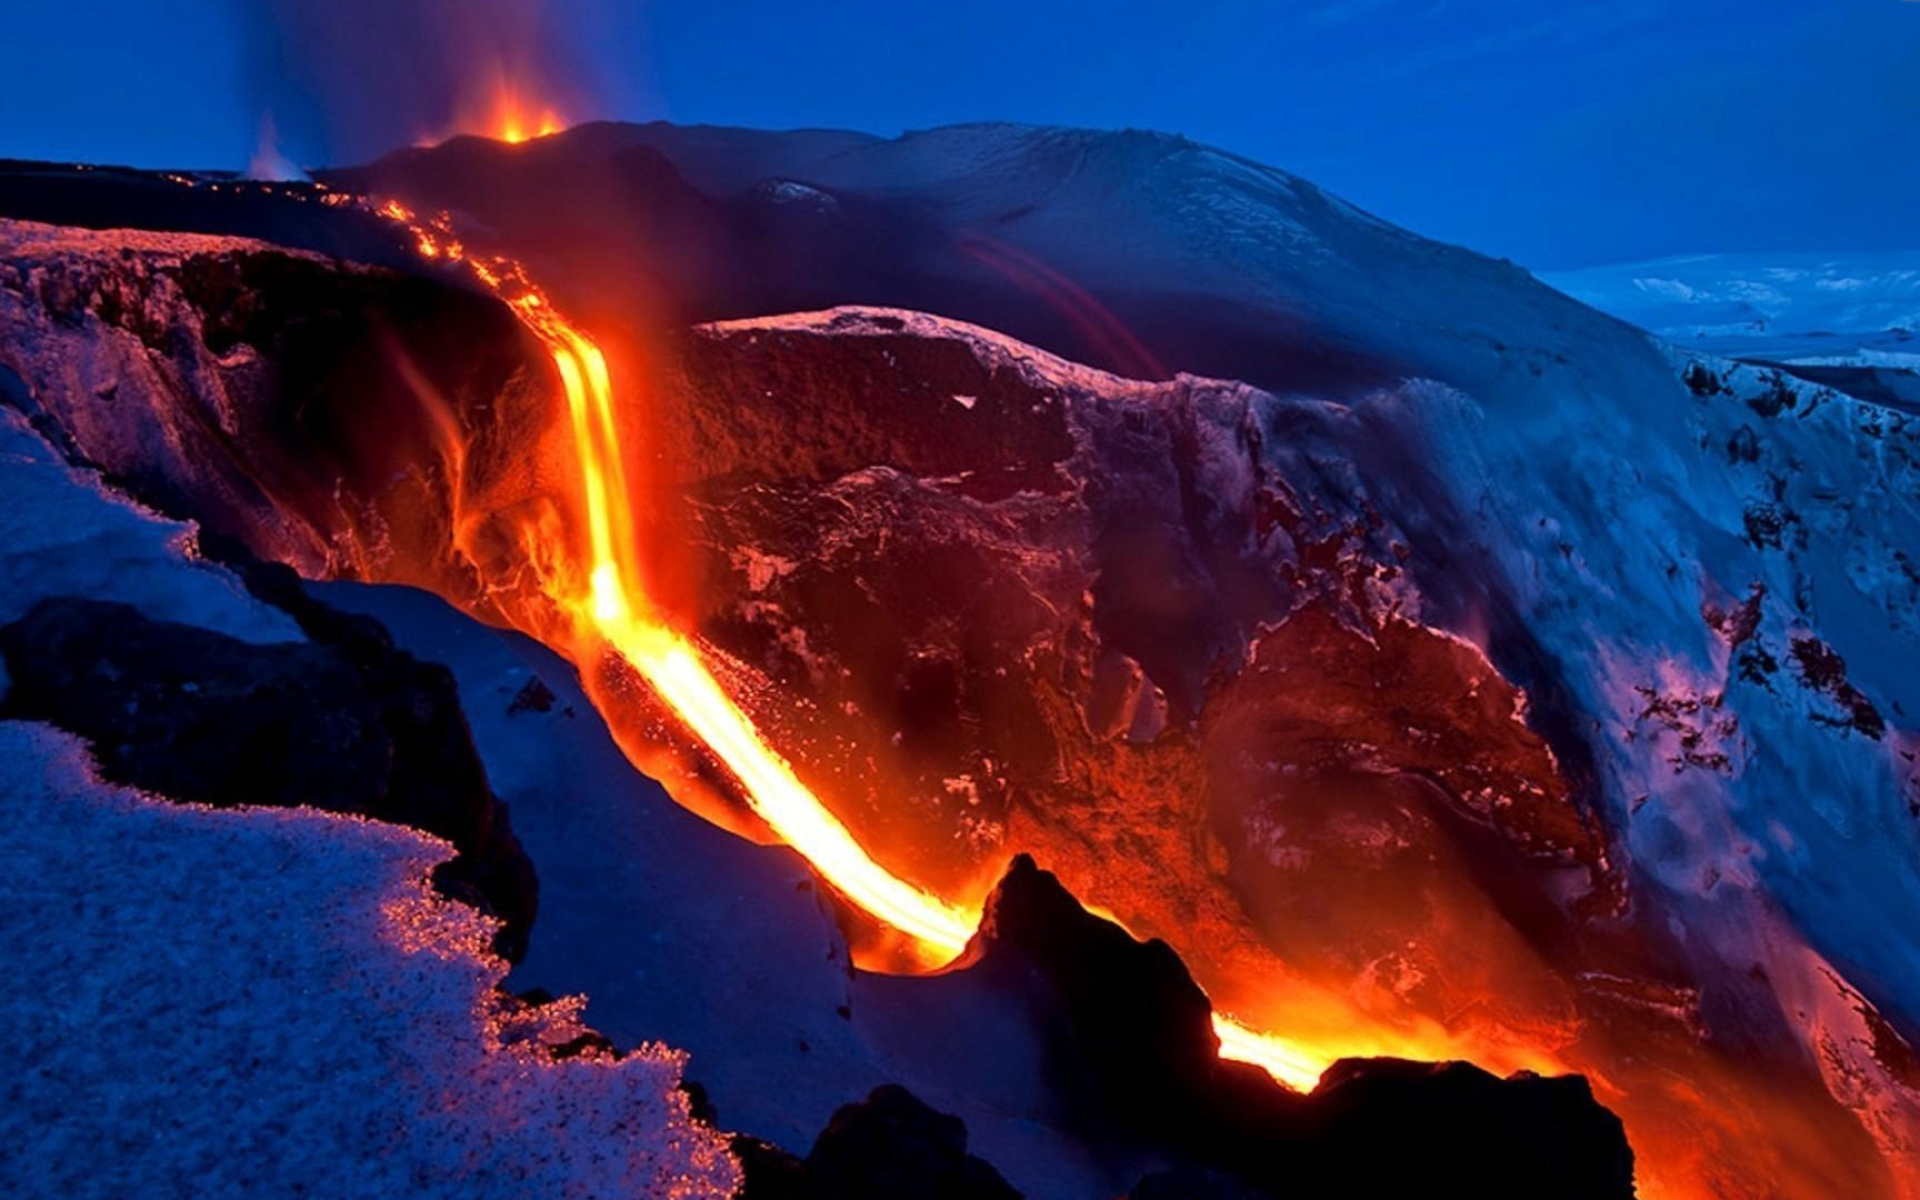 Intense volcanic energy, Active volcano, Nature's fiery force, Power of the earth, 1920x1200 HD Desktop